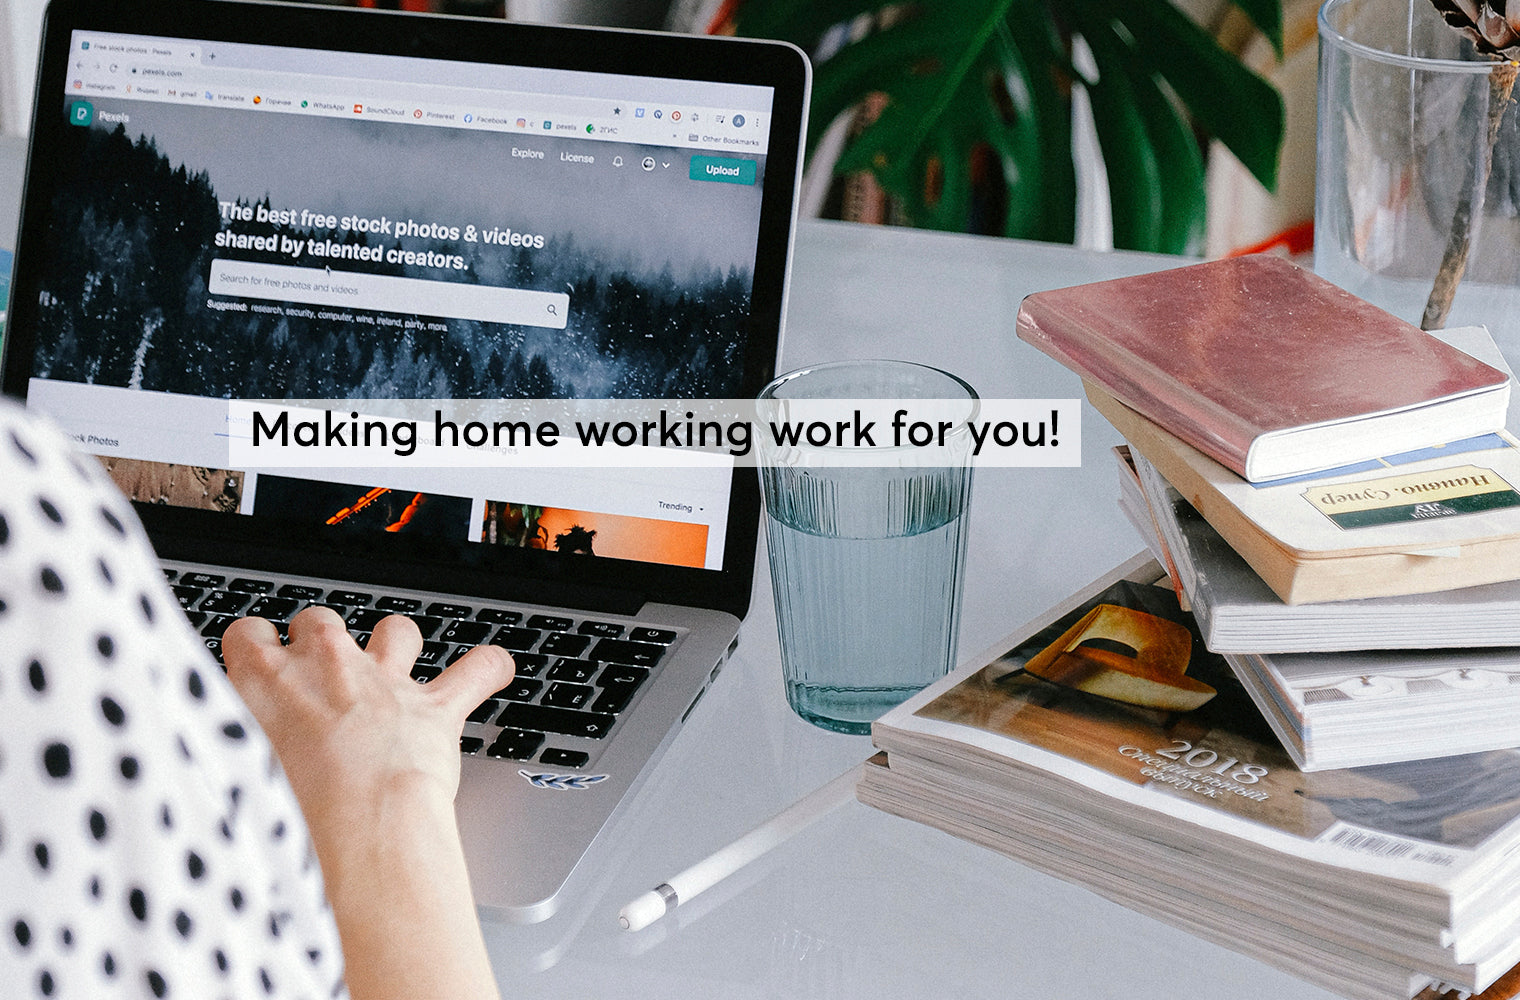 Working from home? Helpful aids to reduce stress during lockdown